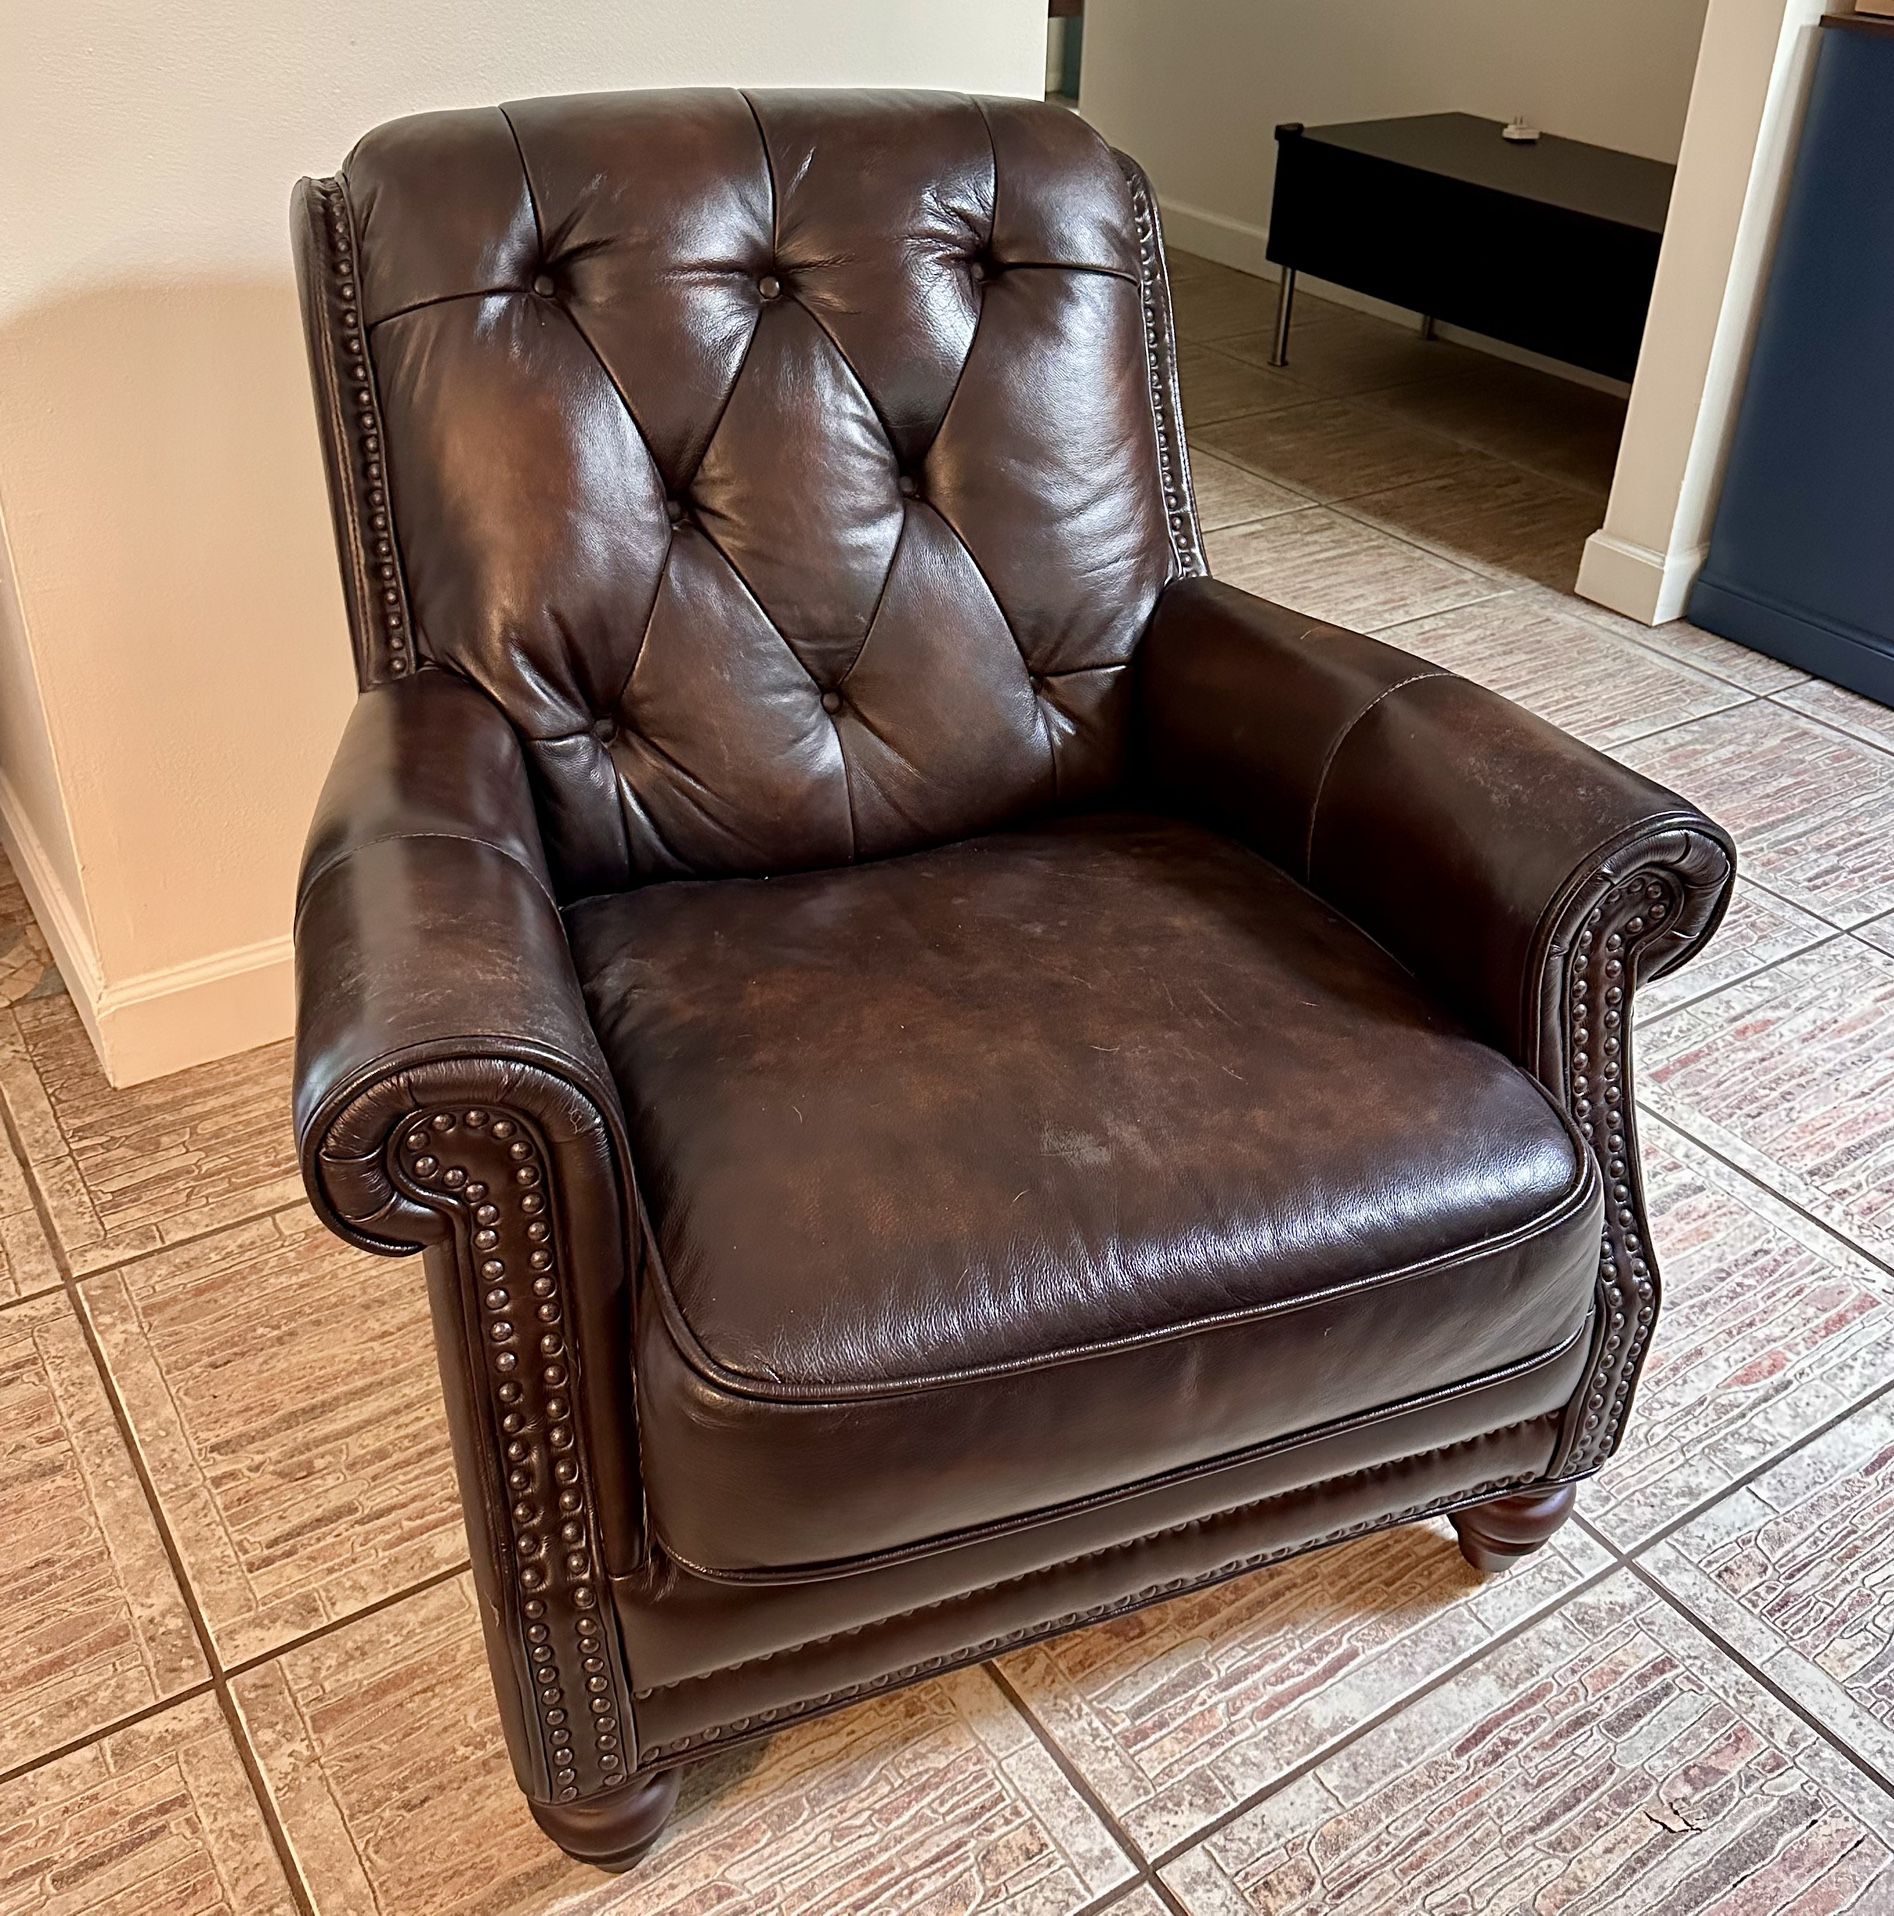 Two Beautiful Brown Leather Armchairs